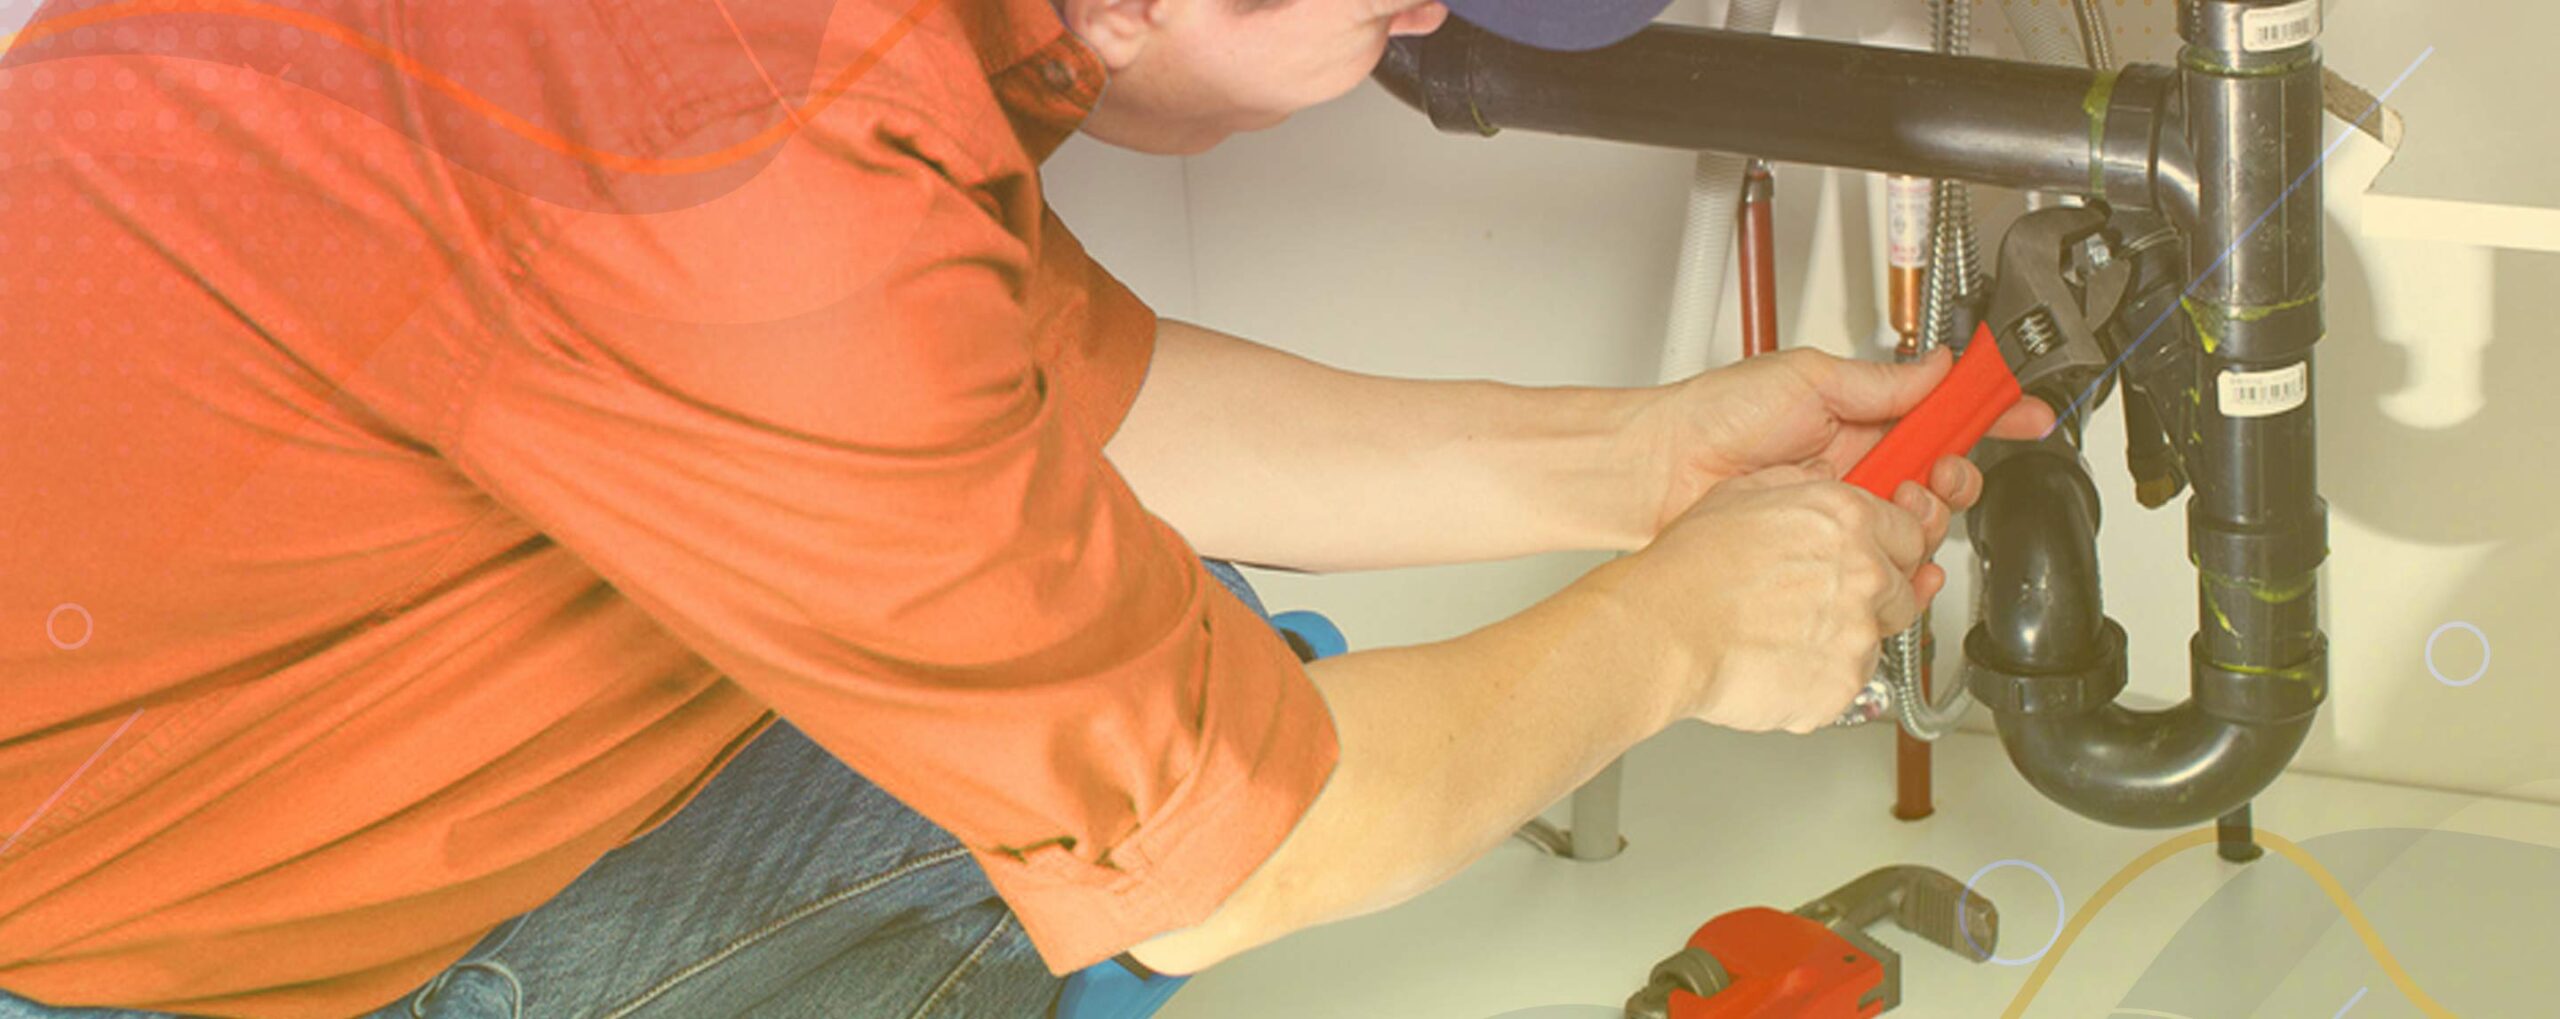 4 Signs You Need To Call A Plumber